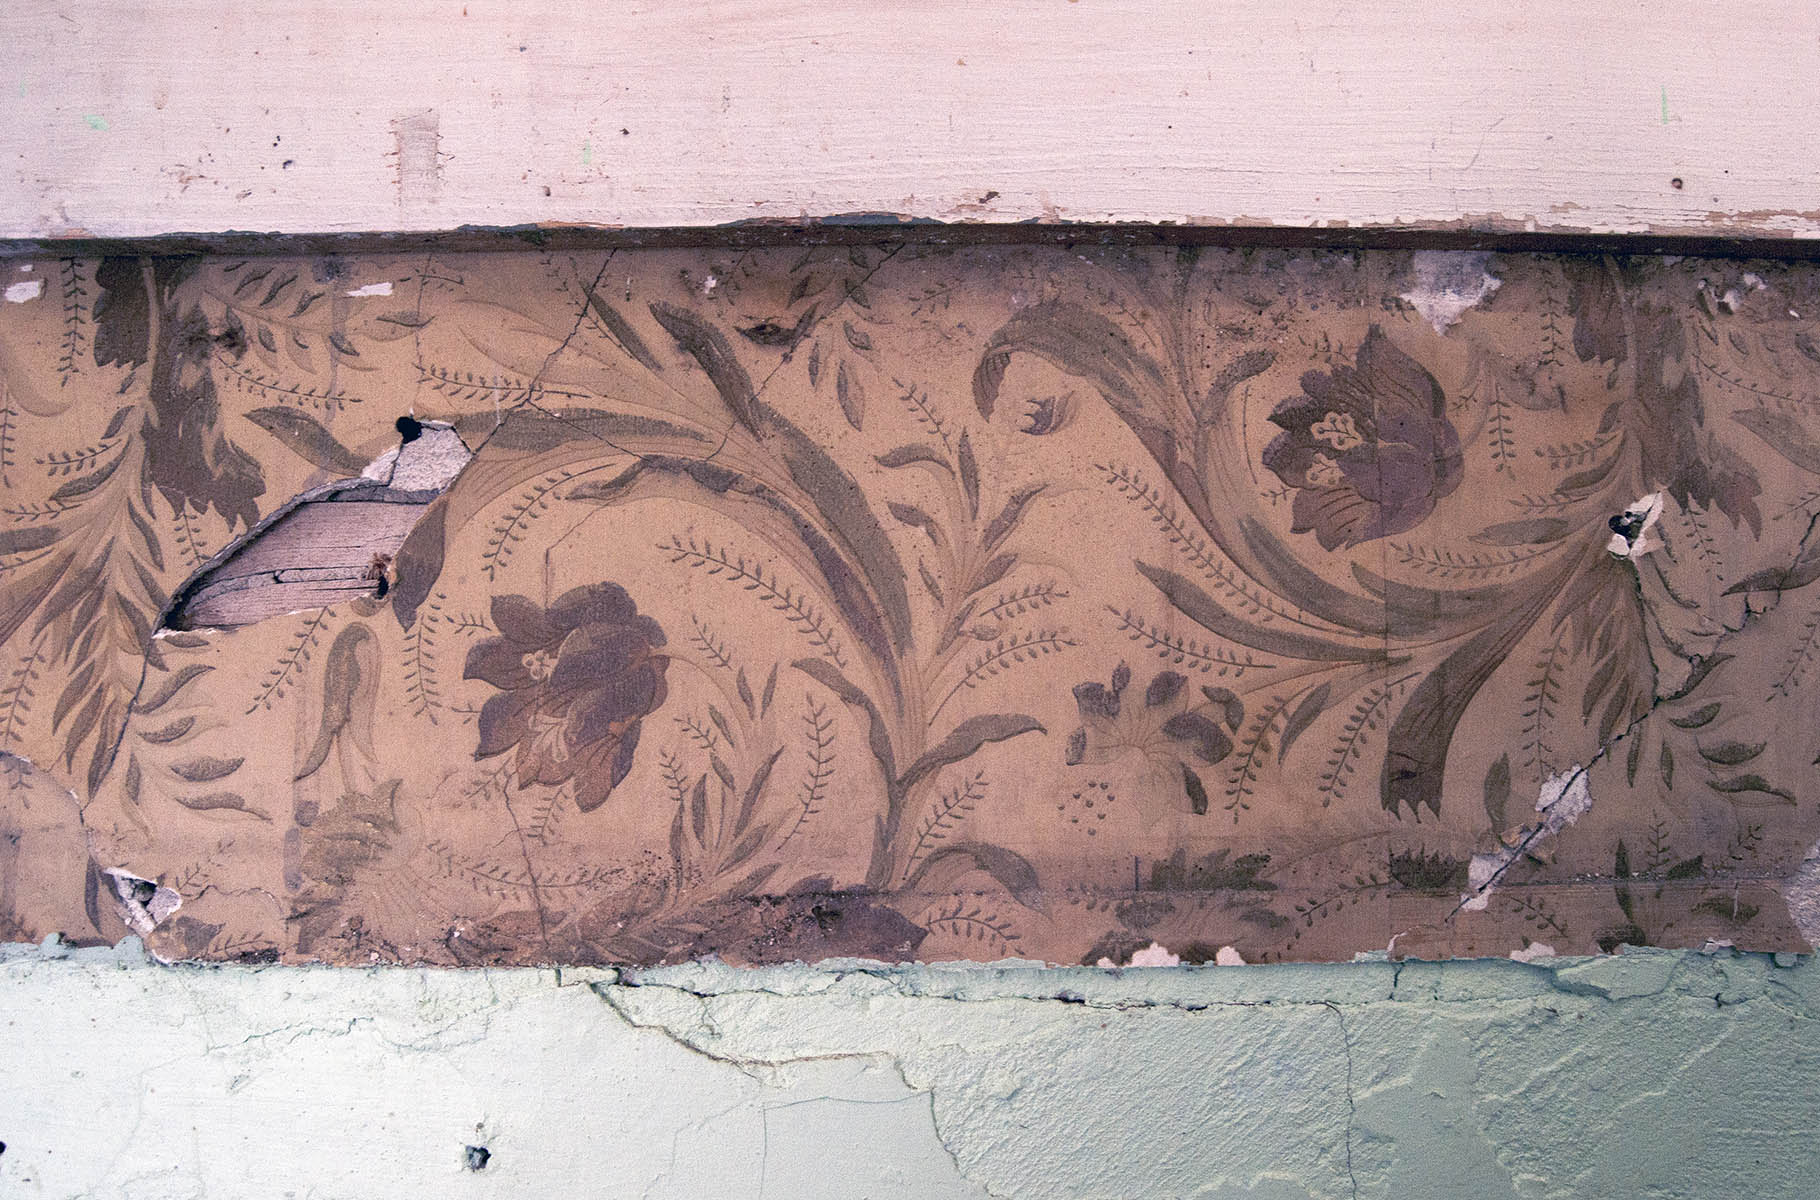 29 of 29 East Monkton Church, old wallpaper on northwest staircase, Nov. 19, 2016, facing north